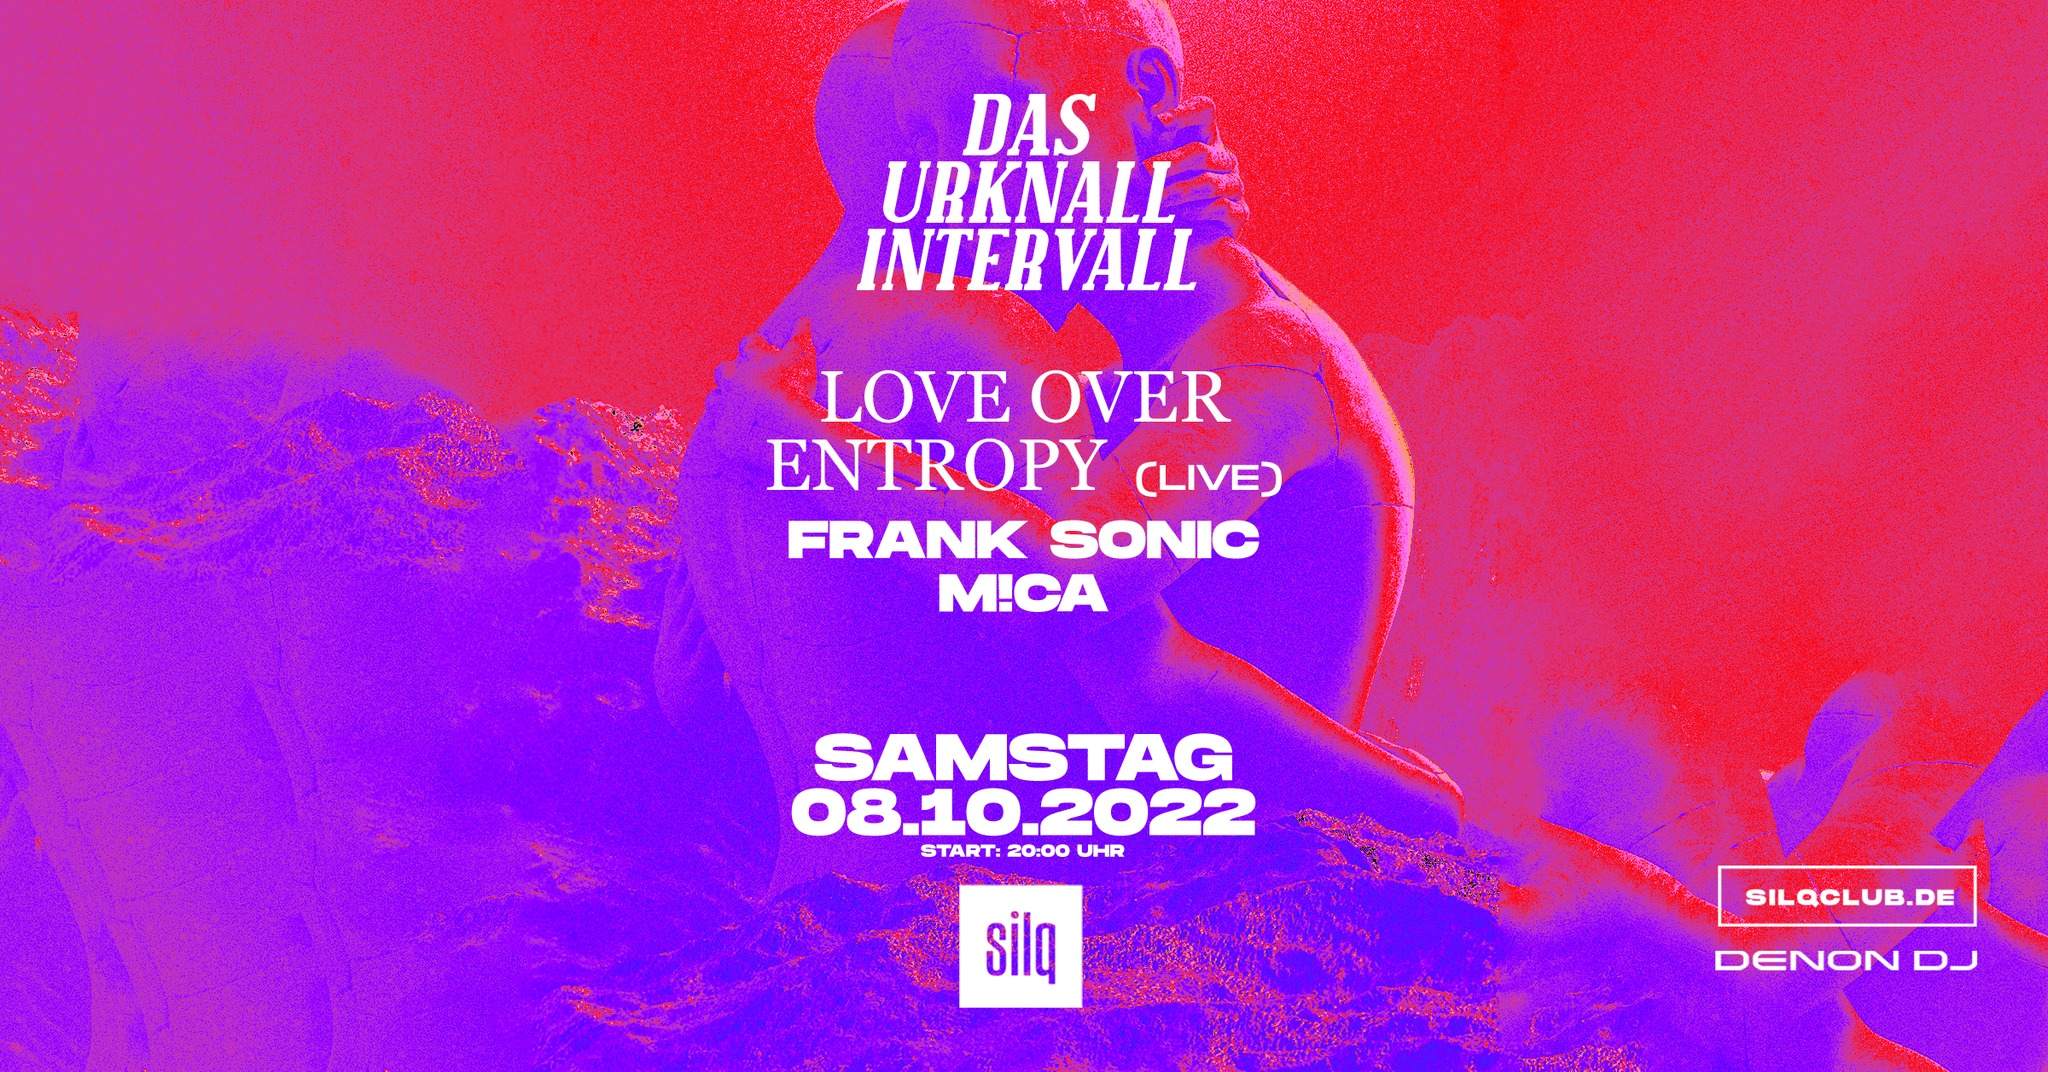 Das Urknall Intervall with Love Over Entropy, Frank Sonic, M!ca - Página frontal